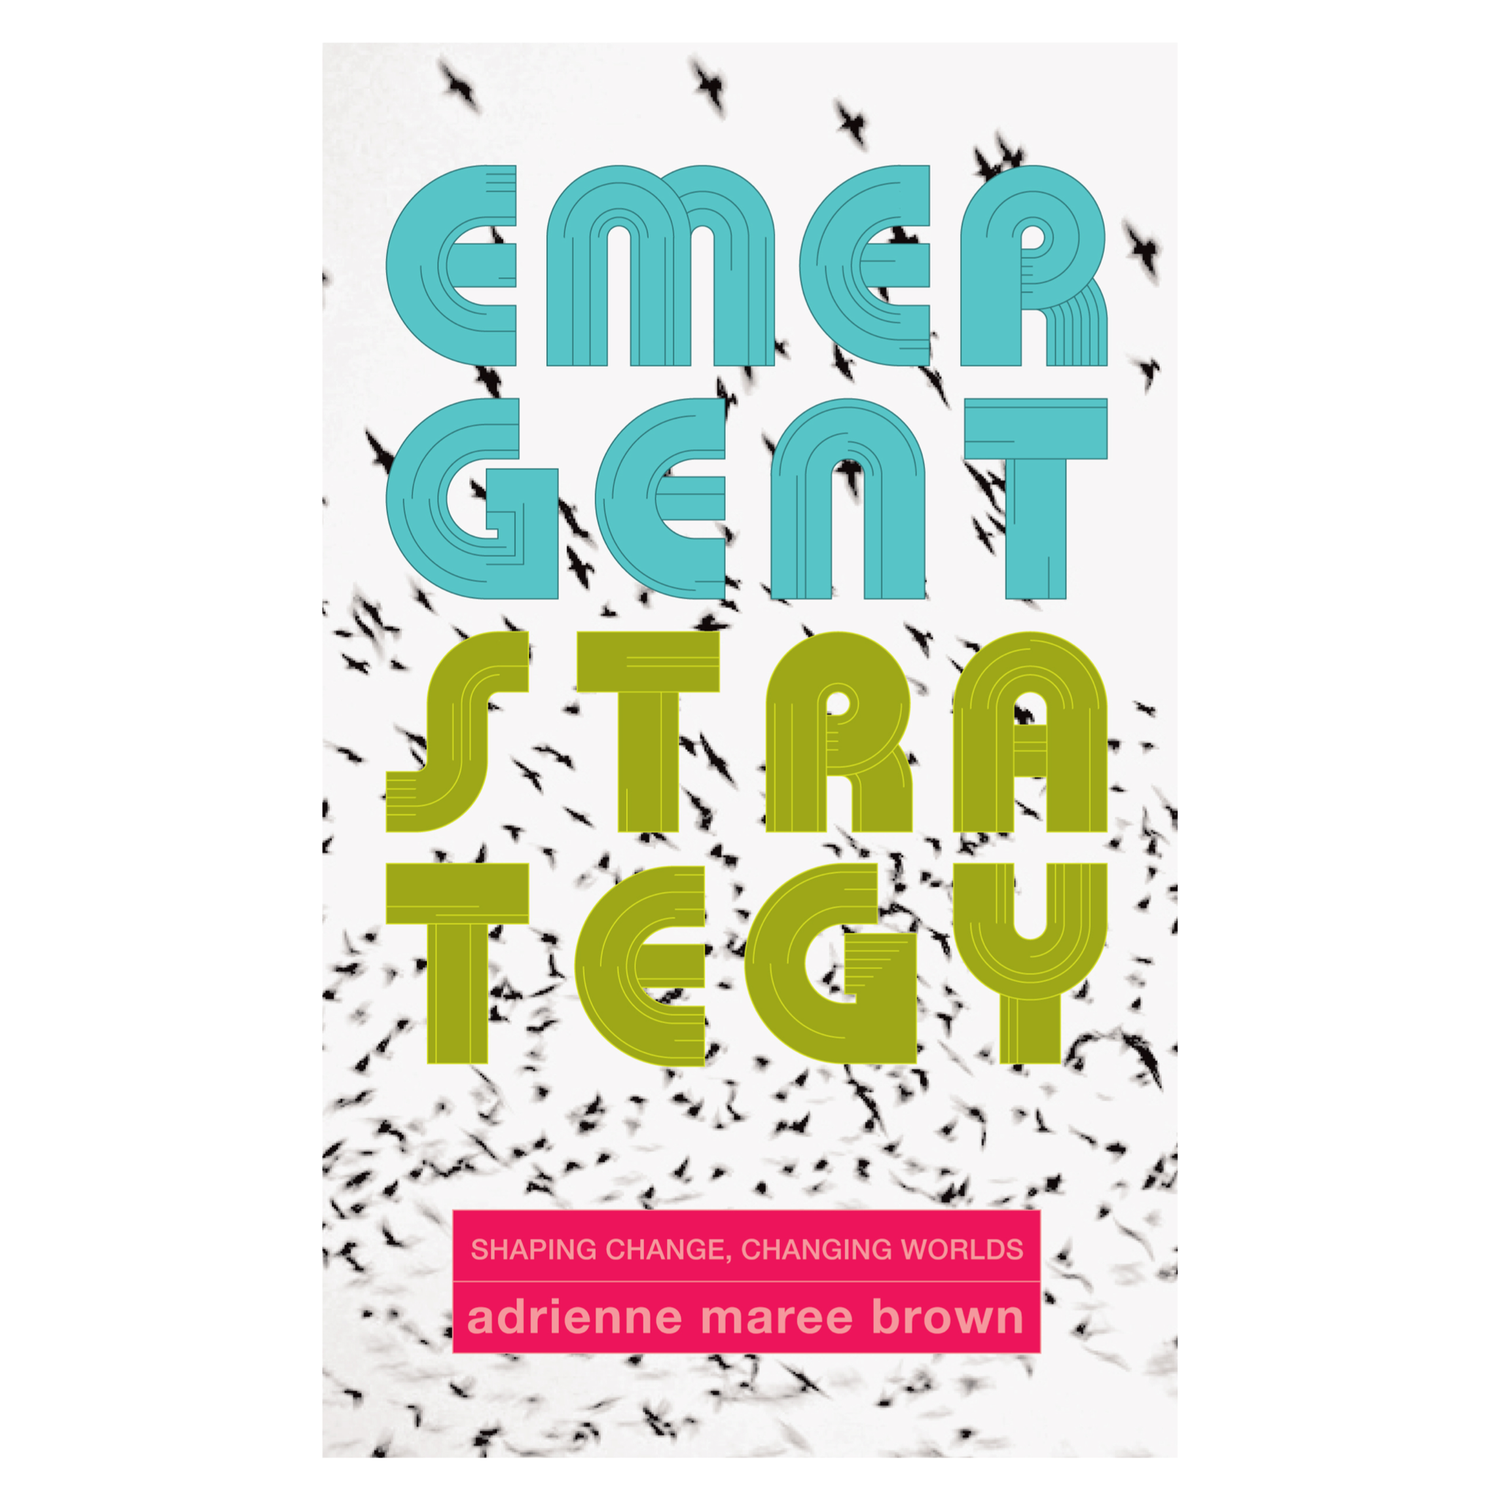 Cover of Emergent Strategy by Adrienne Maree Brown.